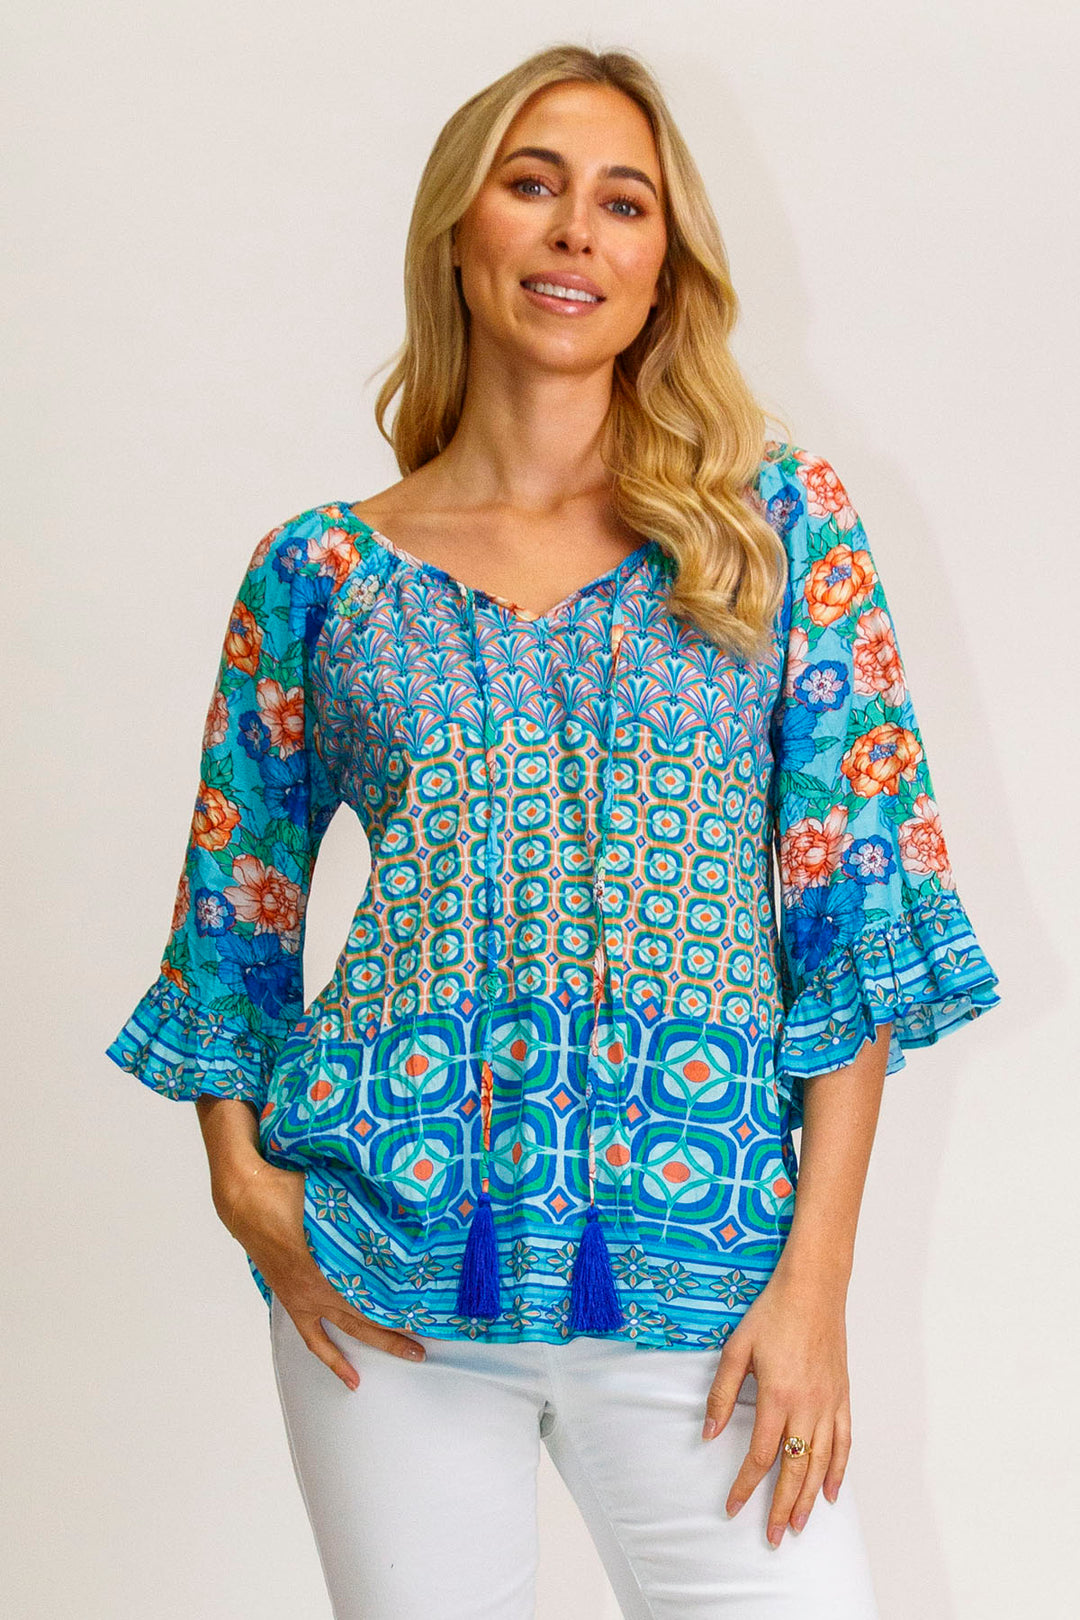 Woman wearing the LulaLife lorne top in Ocean from Pizazz Boutique